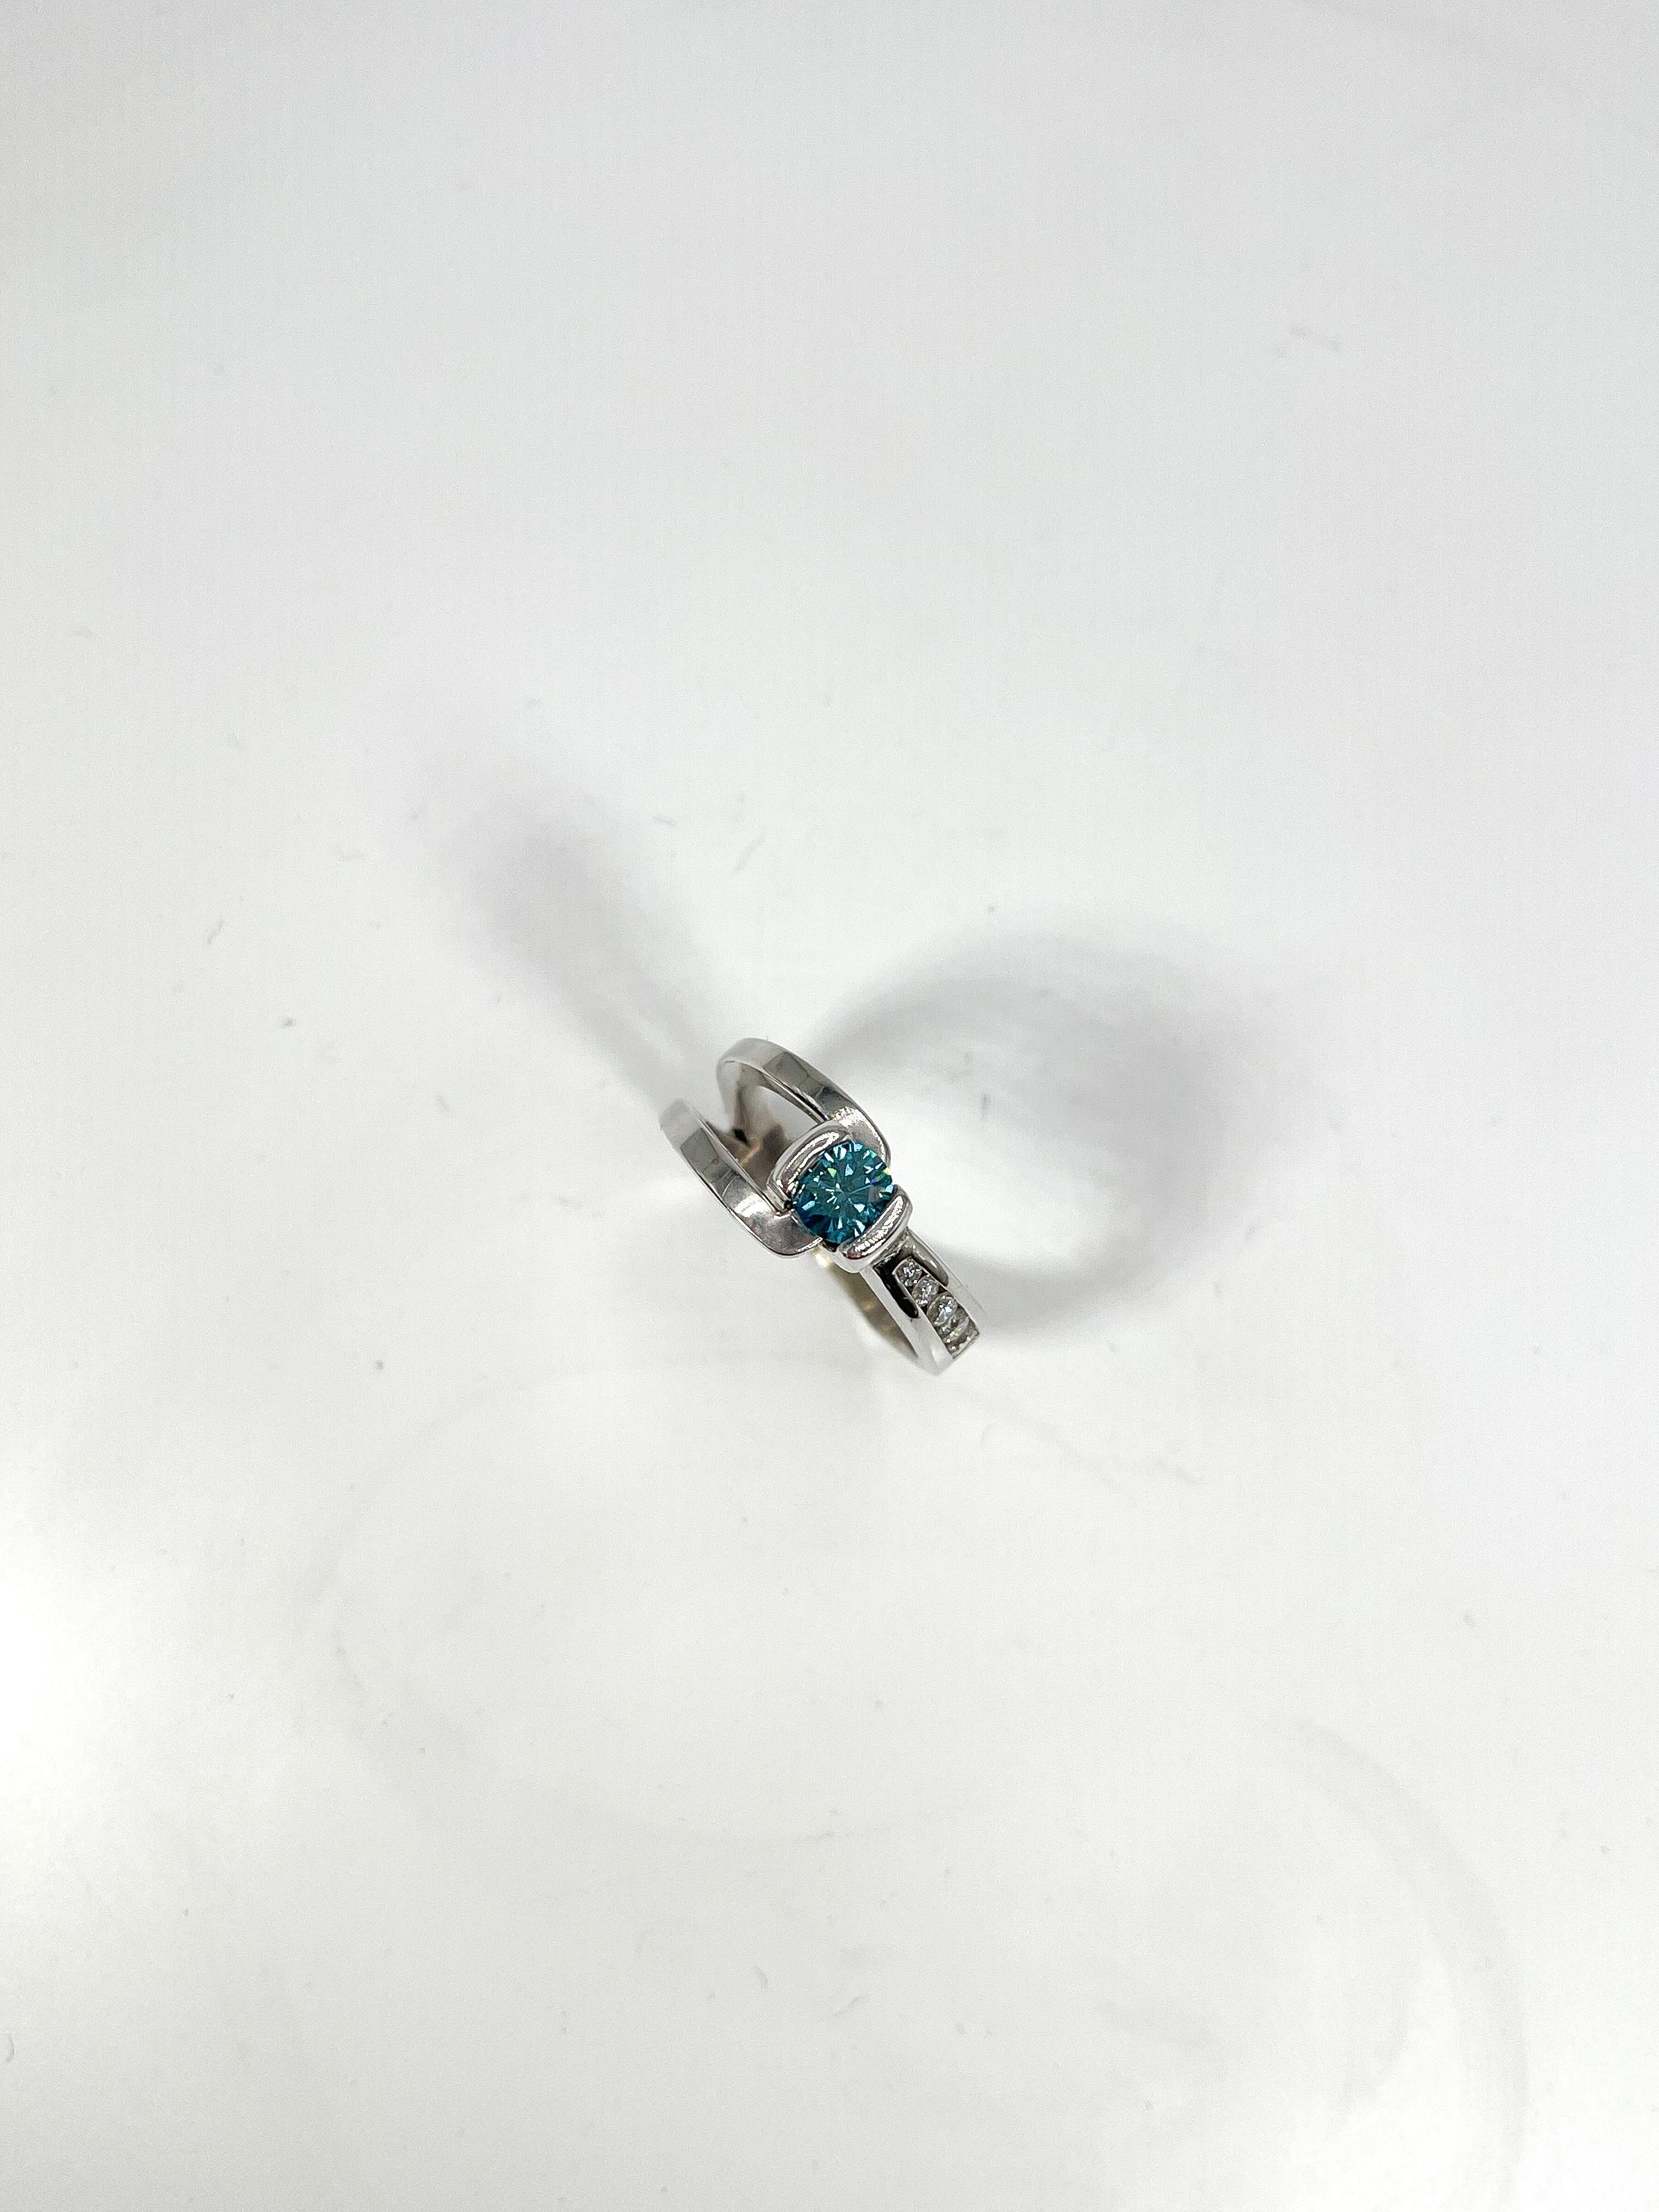 14k white gold .50 CT irradiated blue diamond and .60 CTW white diamond ring. All stones in this ring are round, the width is 8.7 mm, the size is a 6, and it has a total weight of 8.3 grams.